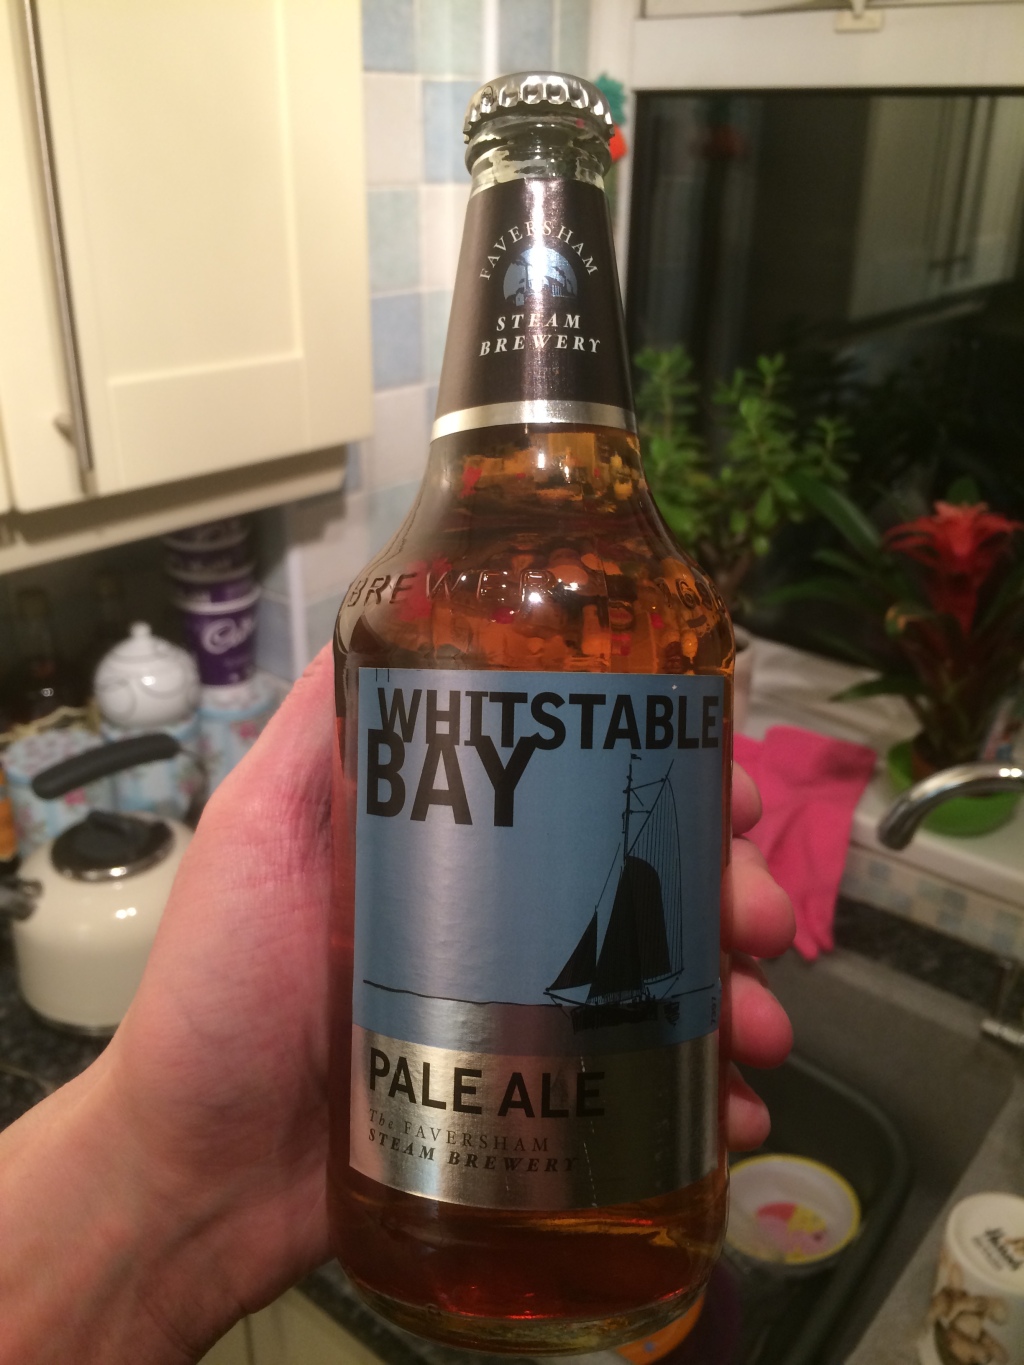 Whitstable Bay Pale Ale